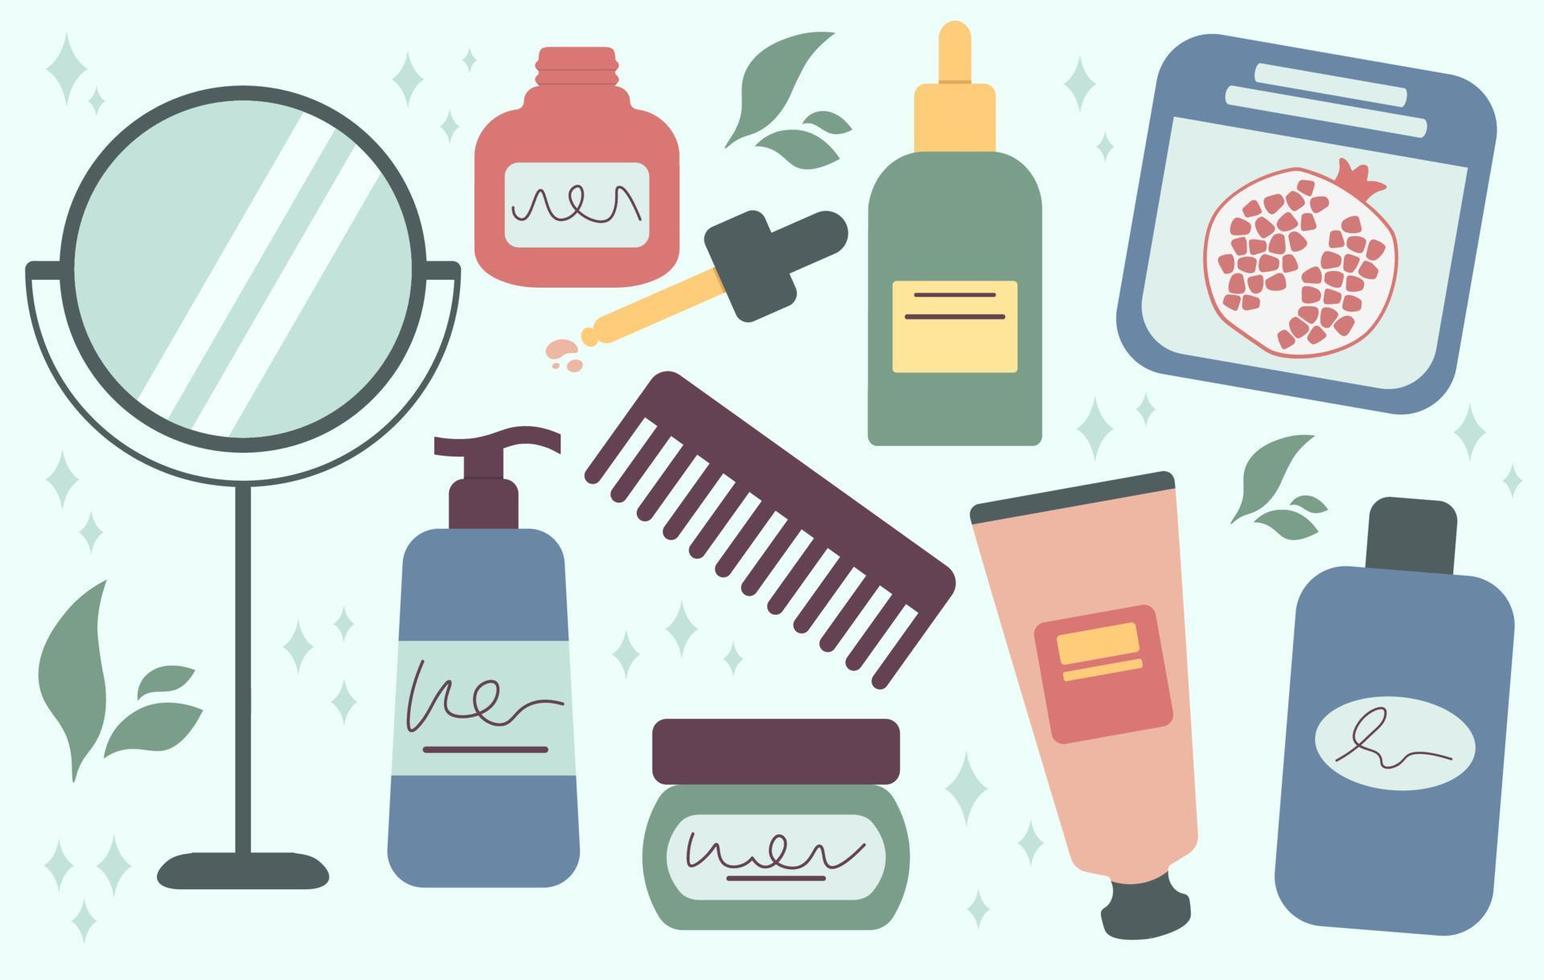 Big Collection Of Beauty Products For Daily Skin Routine Vector Illustration In Flat Style